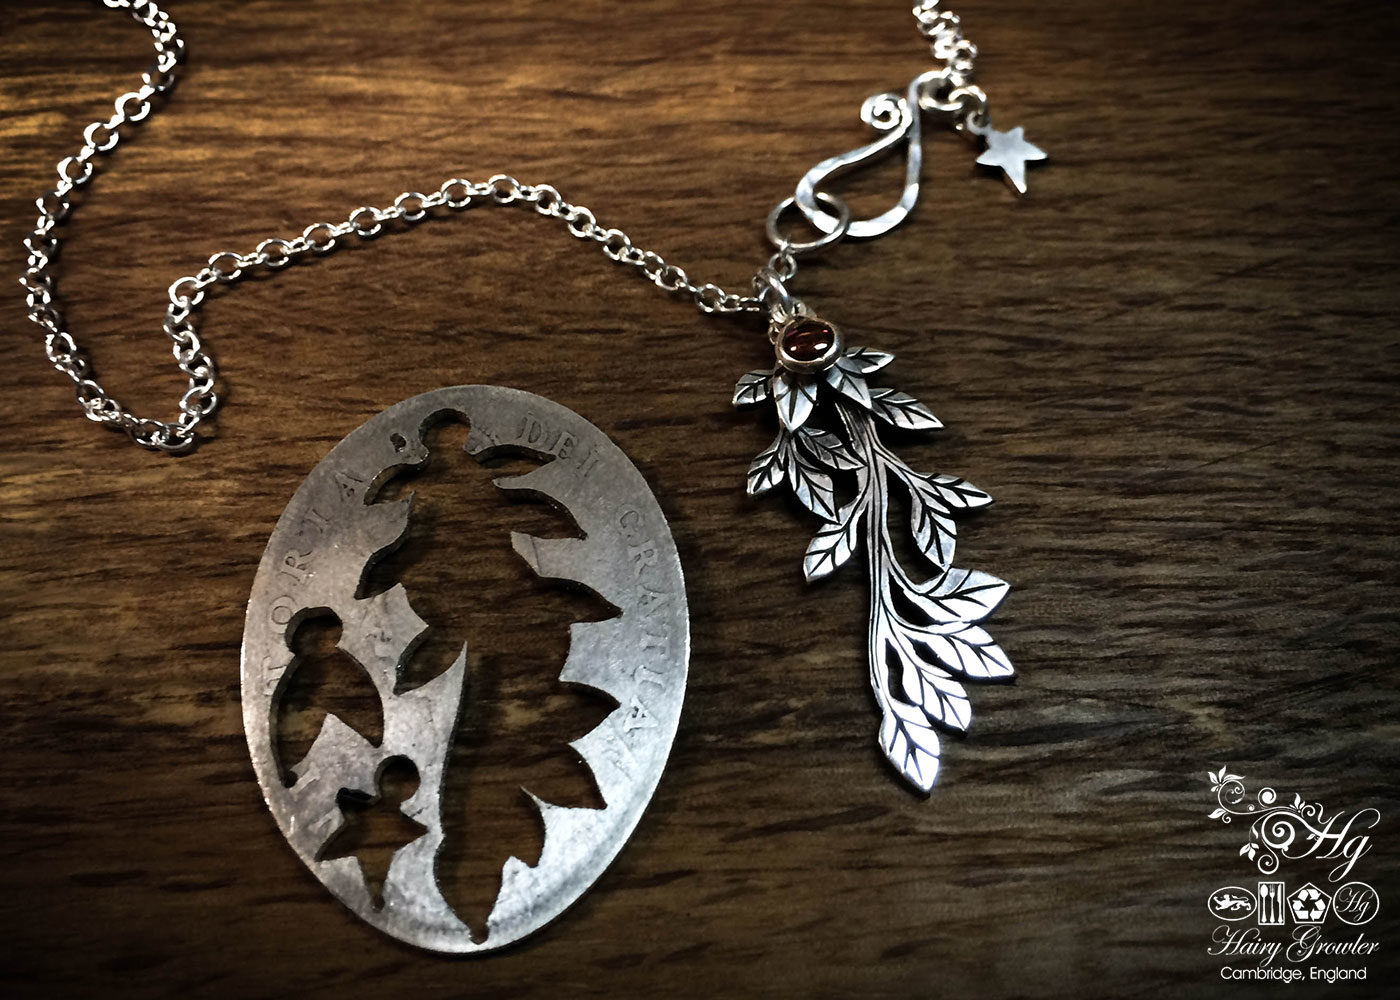 handcrafted and upcycled silver coin leafy branch necklace pendant